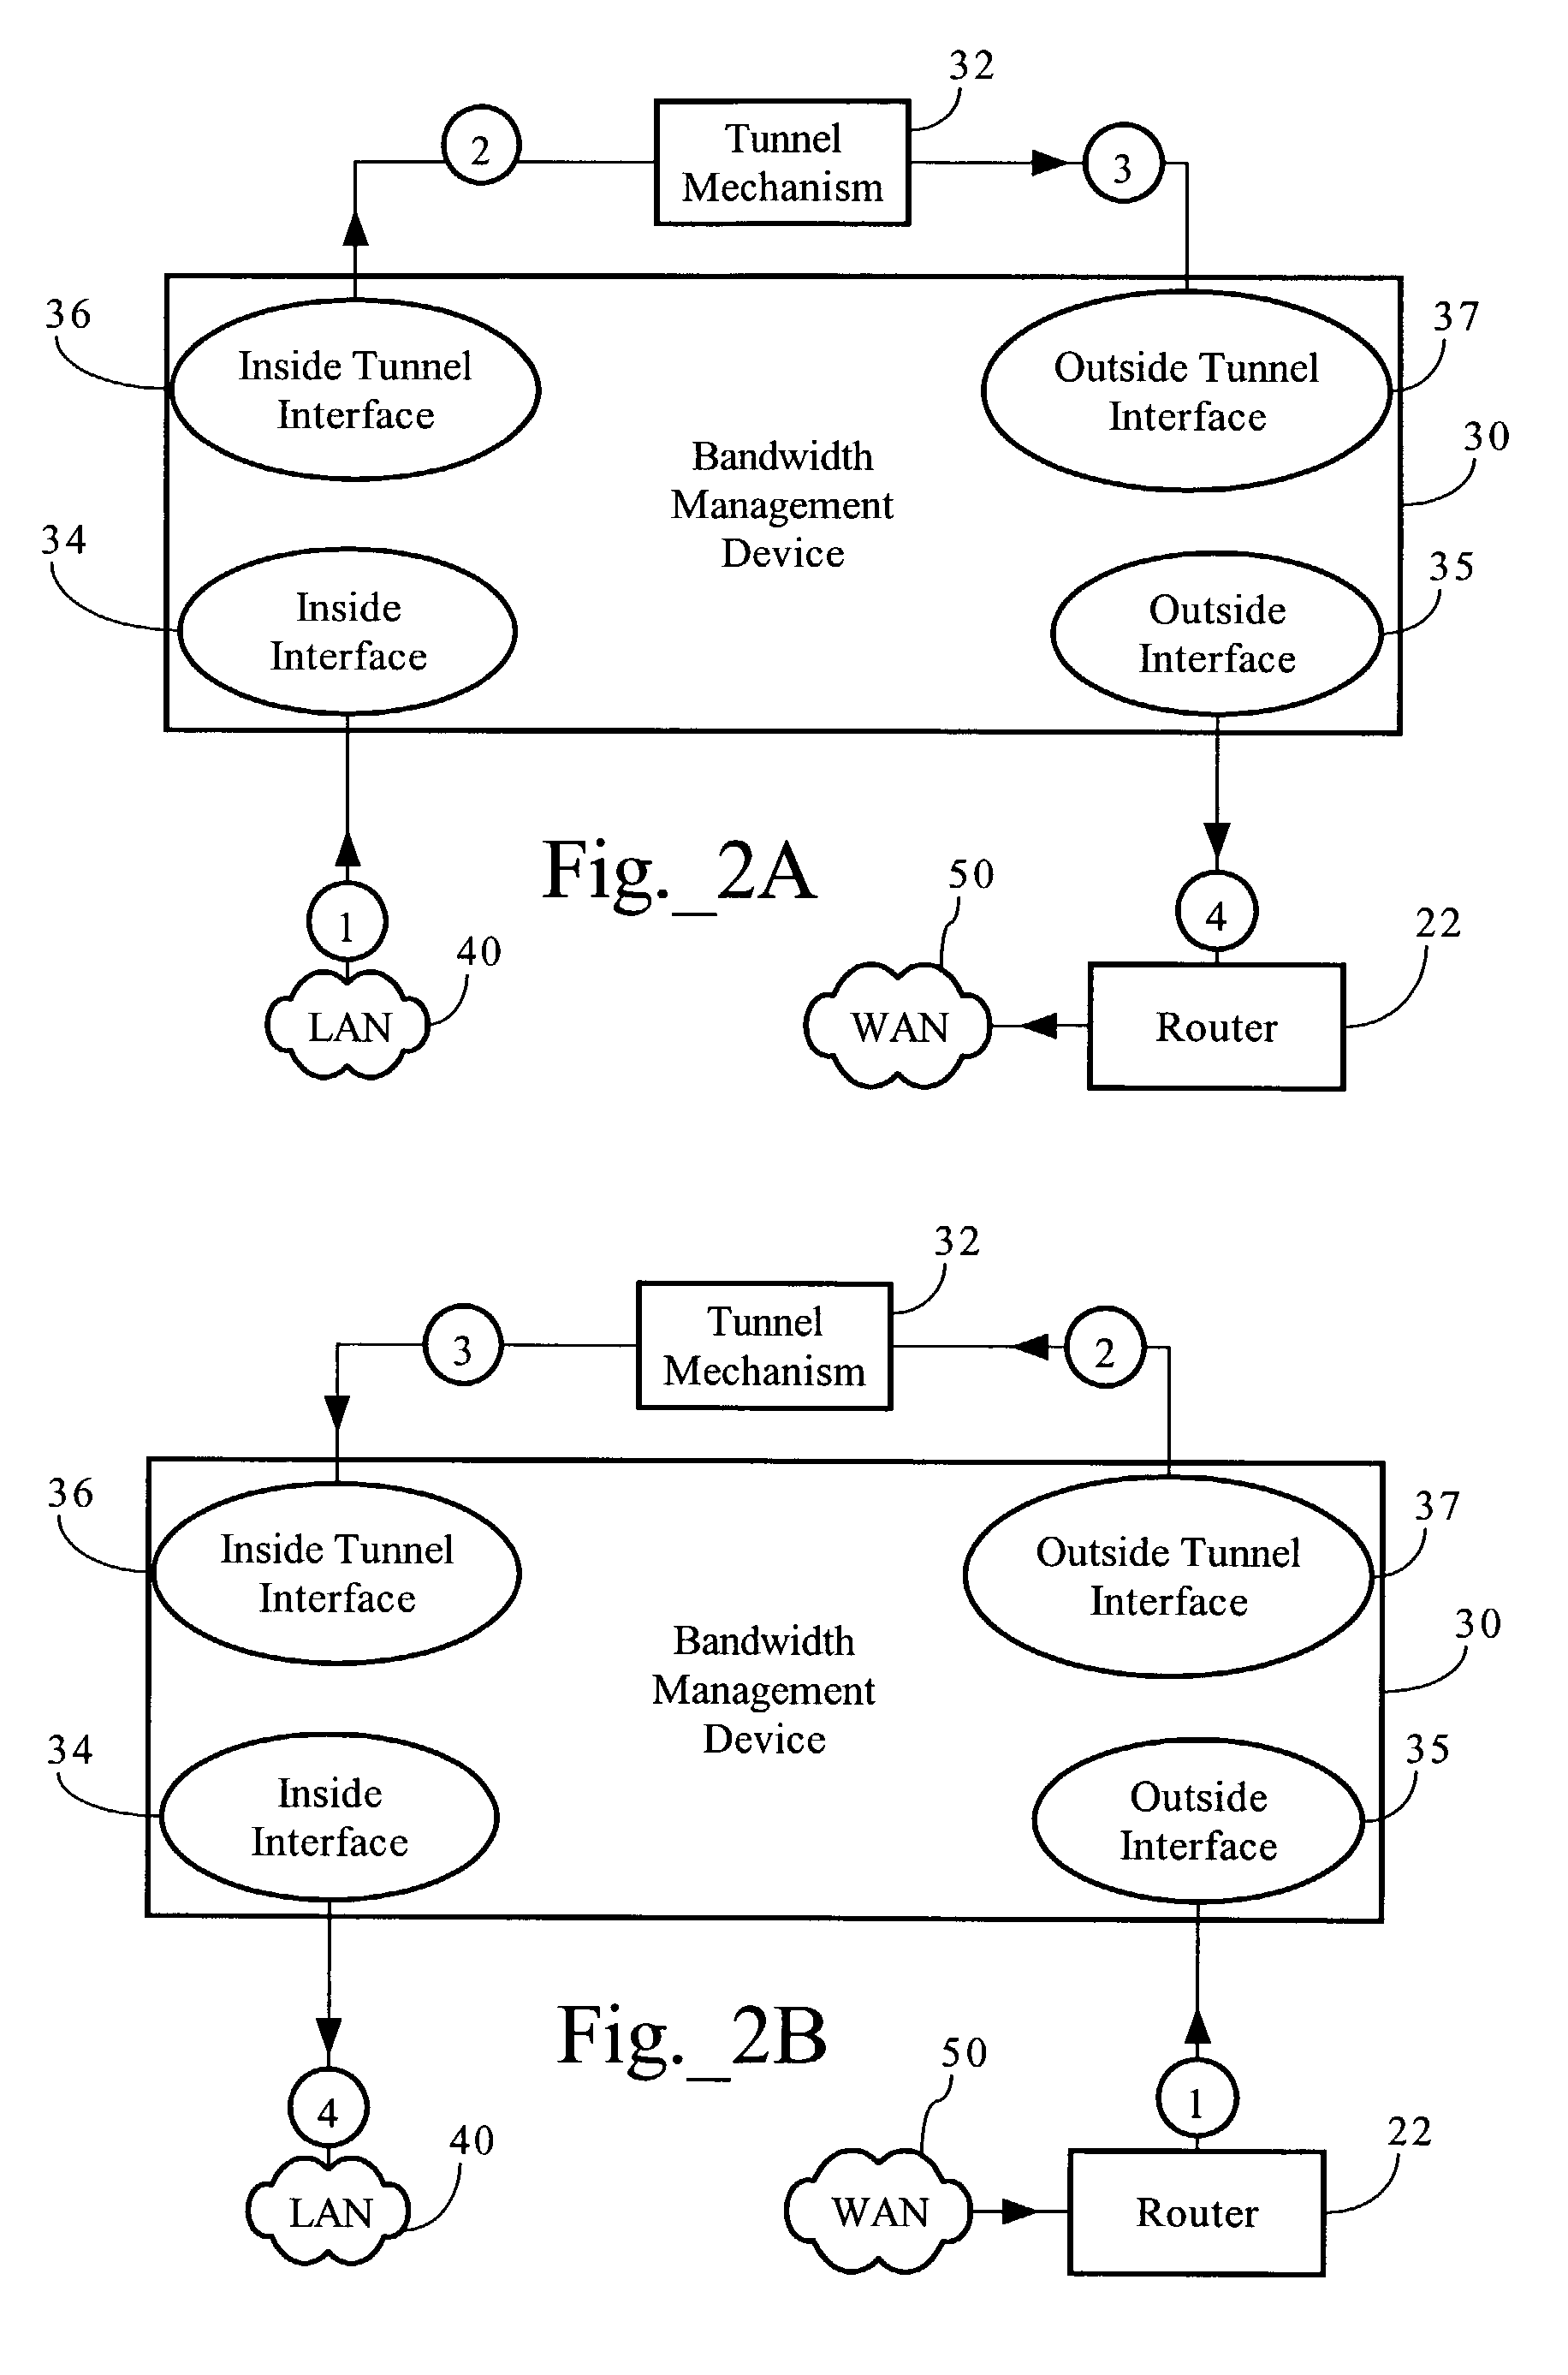 Methods, apparatuses and systems facilitating concurrent classification and control of tunneled and non-tunneled network traffic